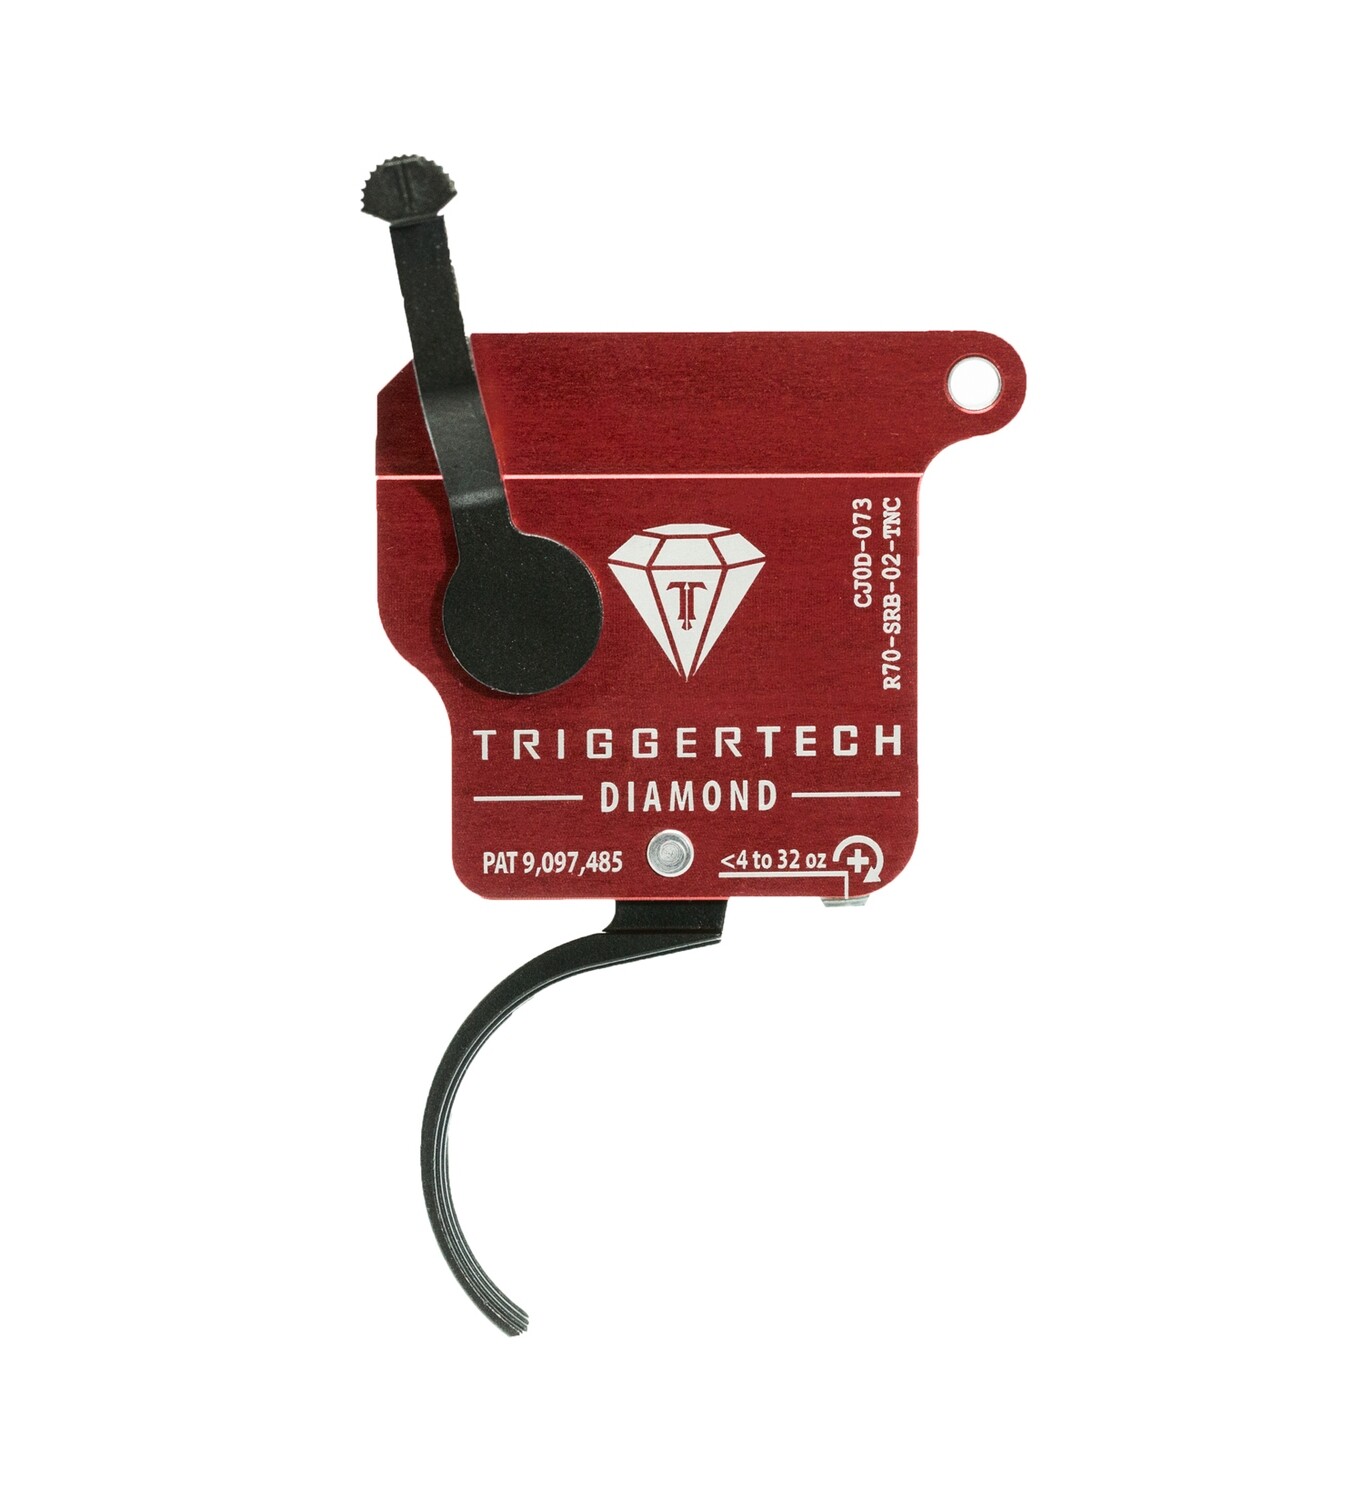 TriggerTech Diamond 4-32oz Curved PVD Trigger for Remington 700 Footprint Actions Right Handed